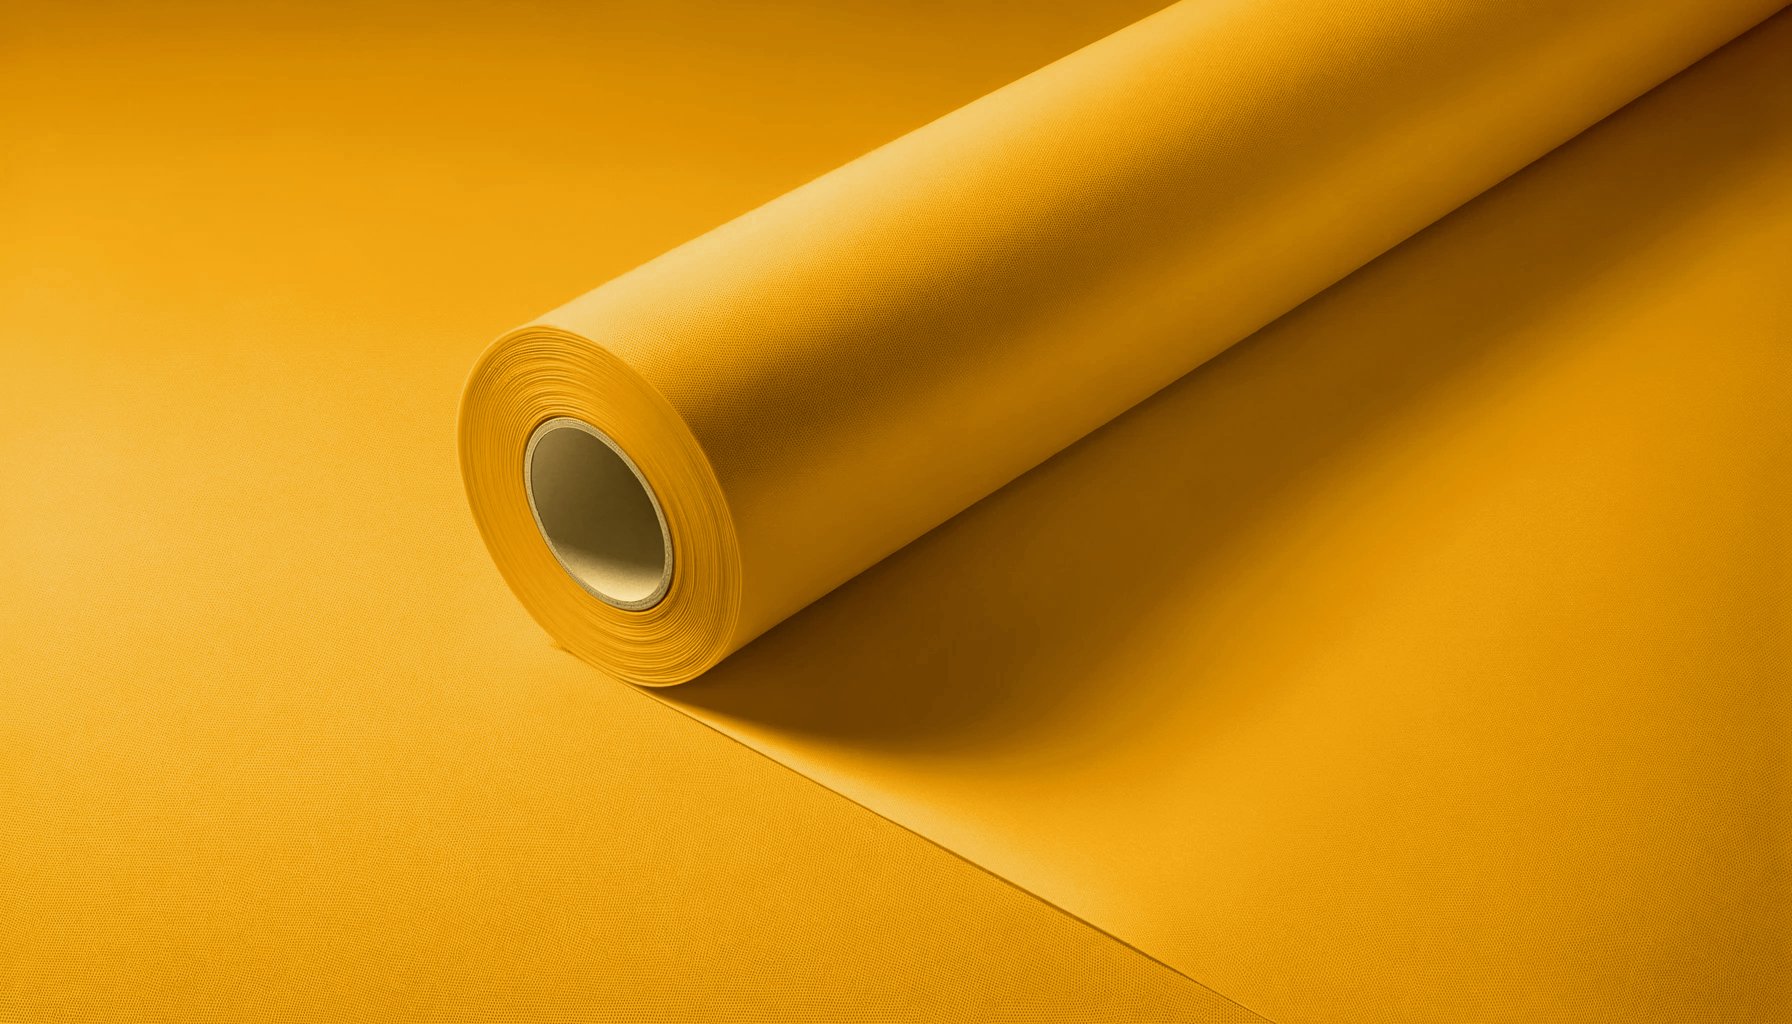 Peel & Stick Removable Re-usable Paint - Color RAL 1004 Golden Yellow - offRAL™ - RALRAW LLC, USA